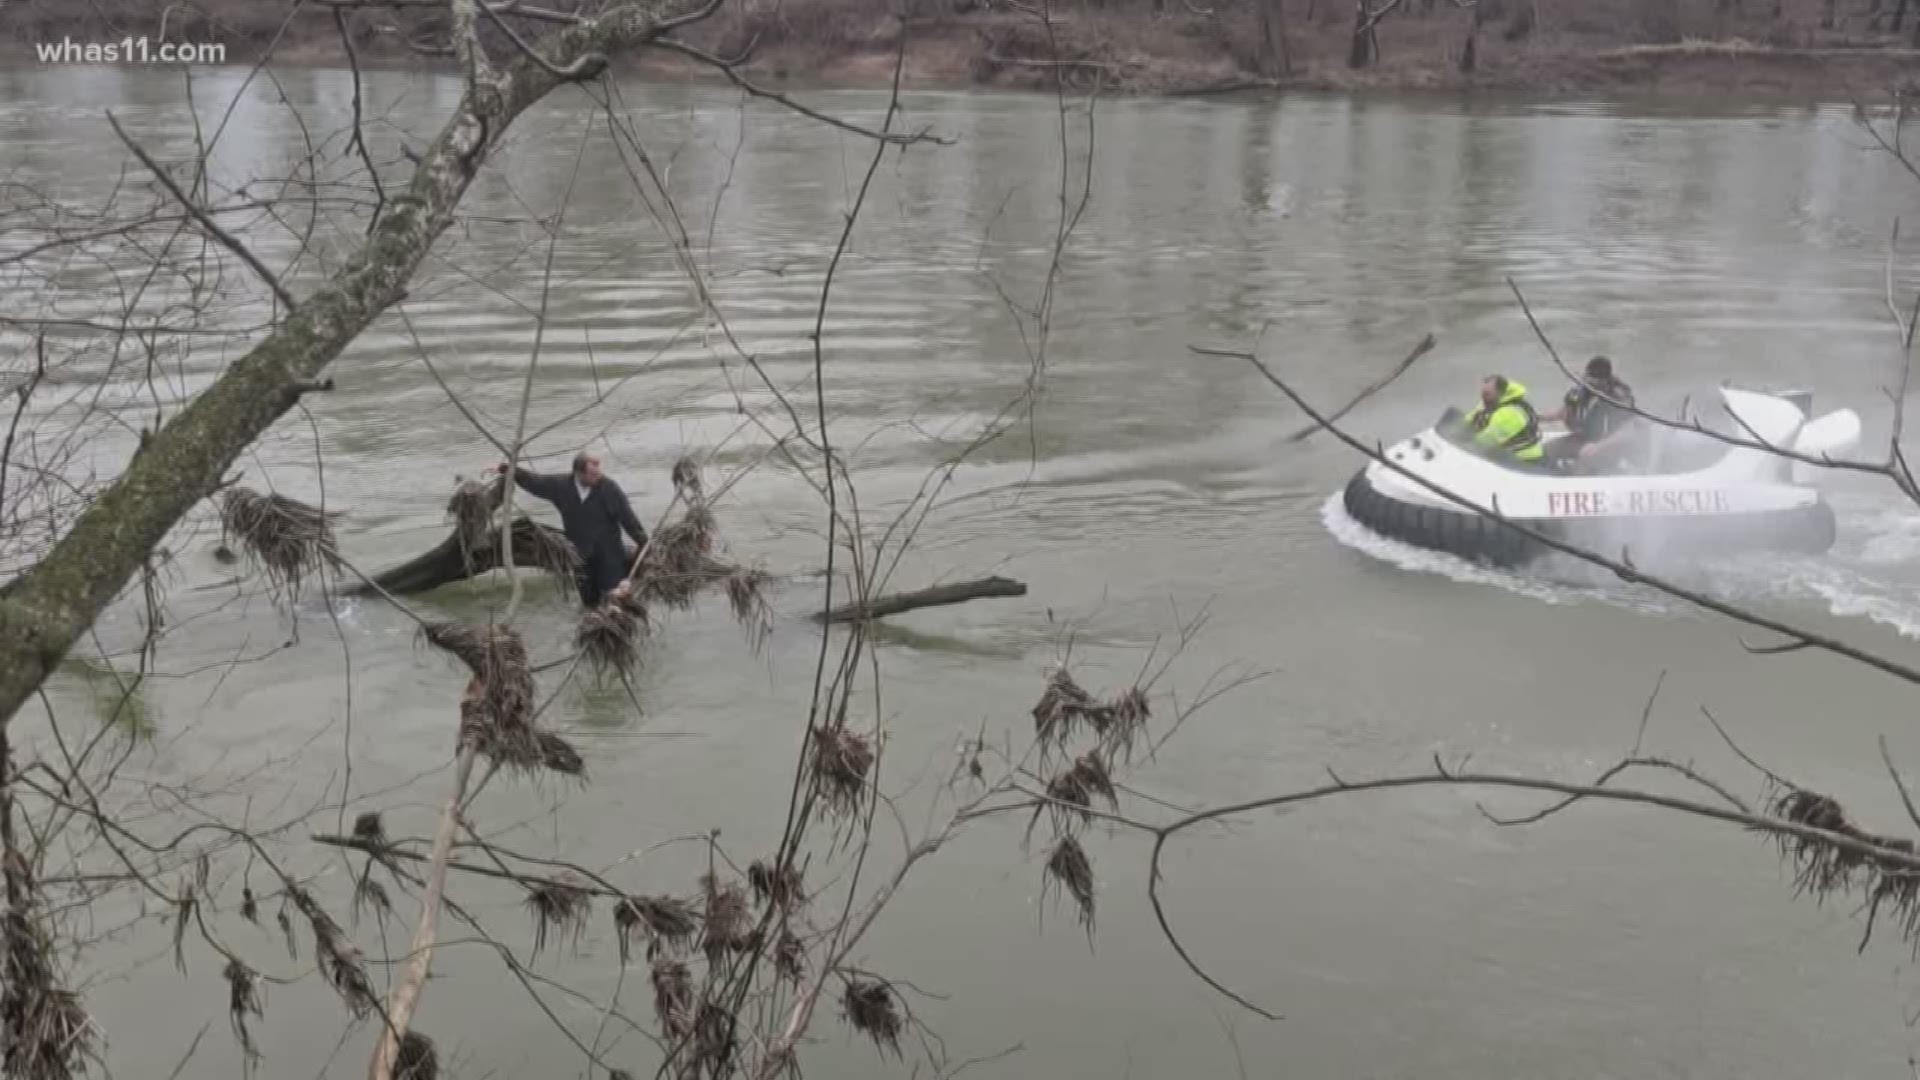 When an Indiana deputy attempted to serve a warrant, the suspect ran and jumped into the White River. The man then had to be rescued.